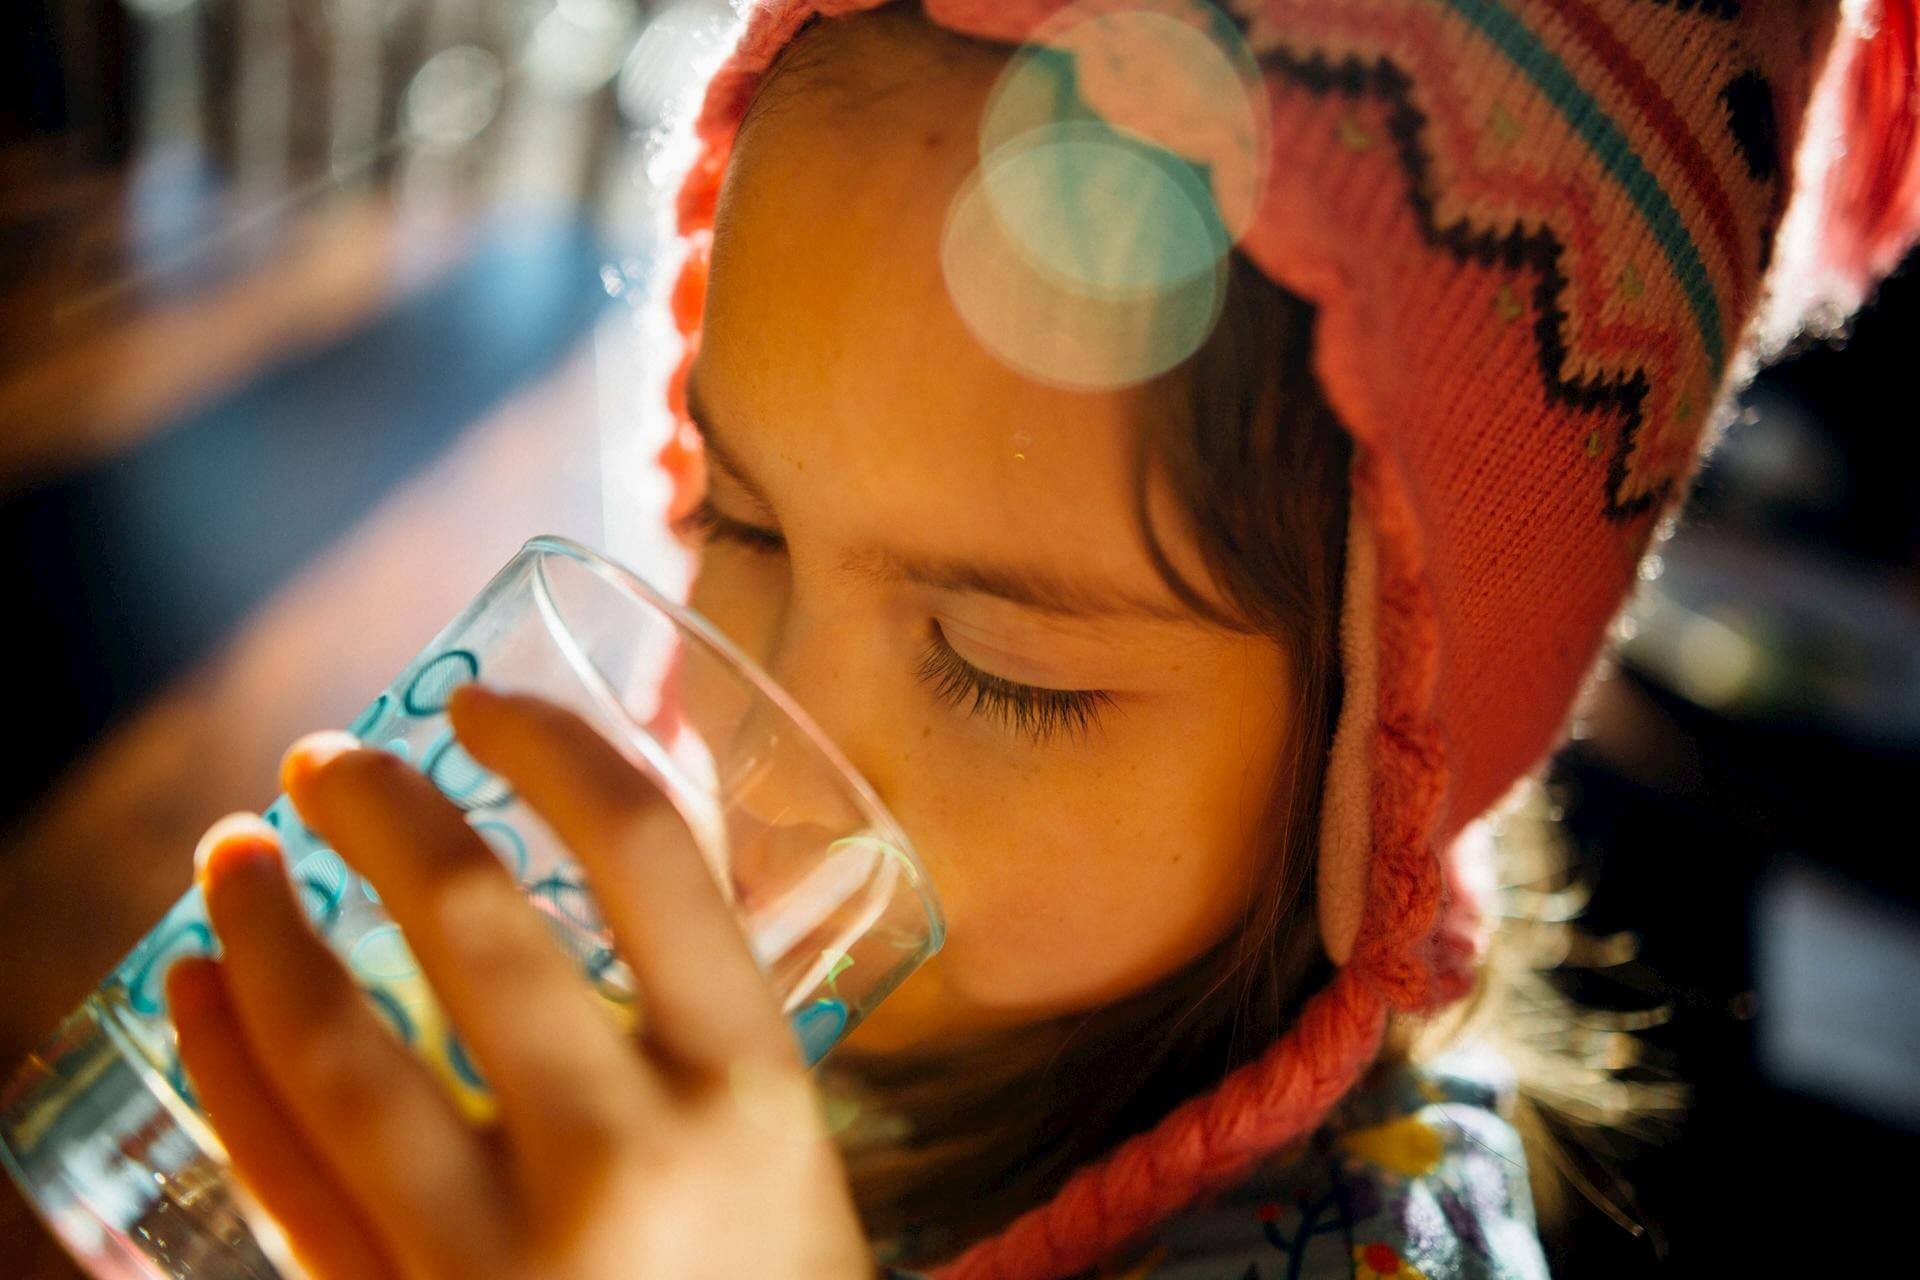 Photo of a young girl drinking a glass of water.